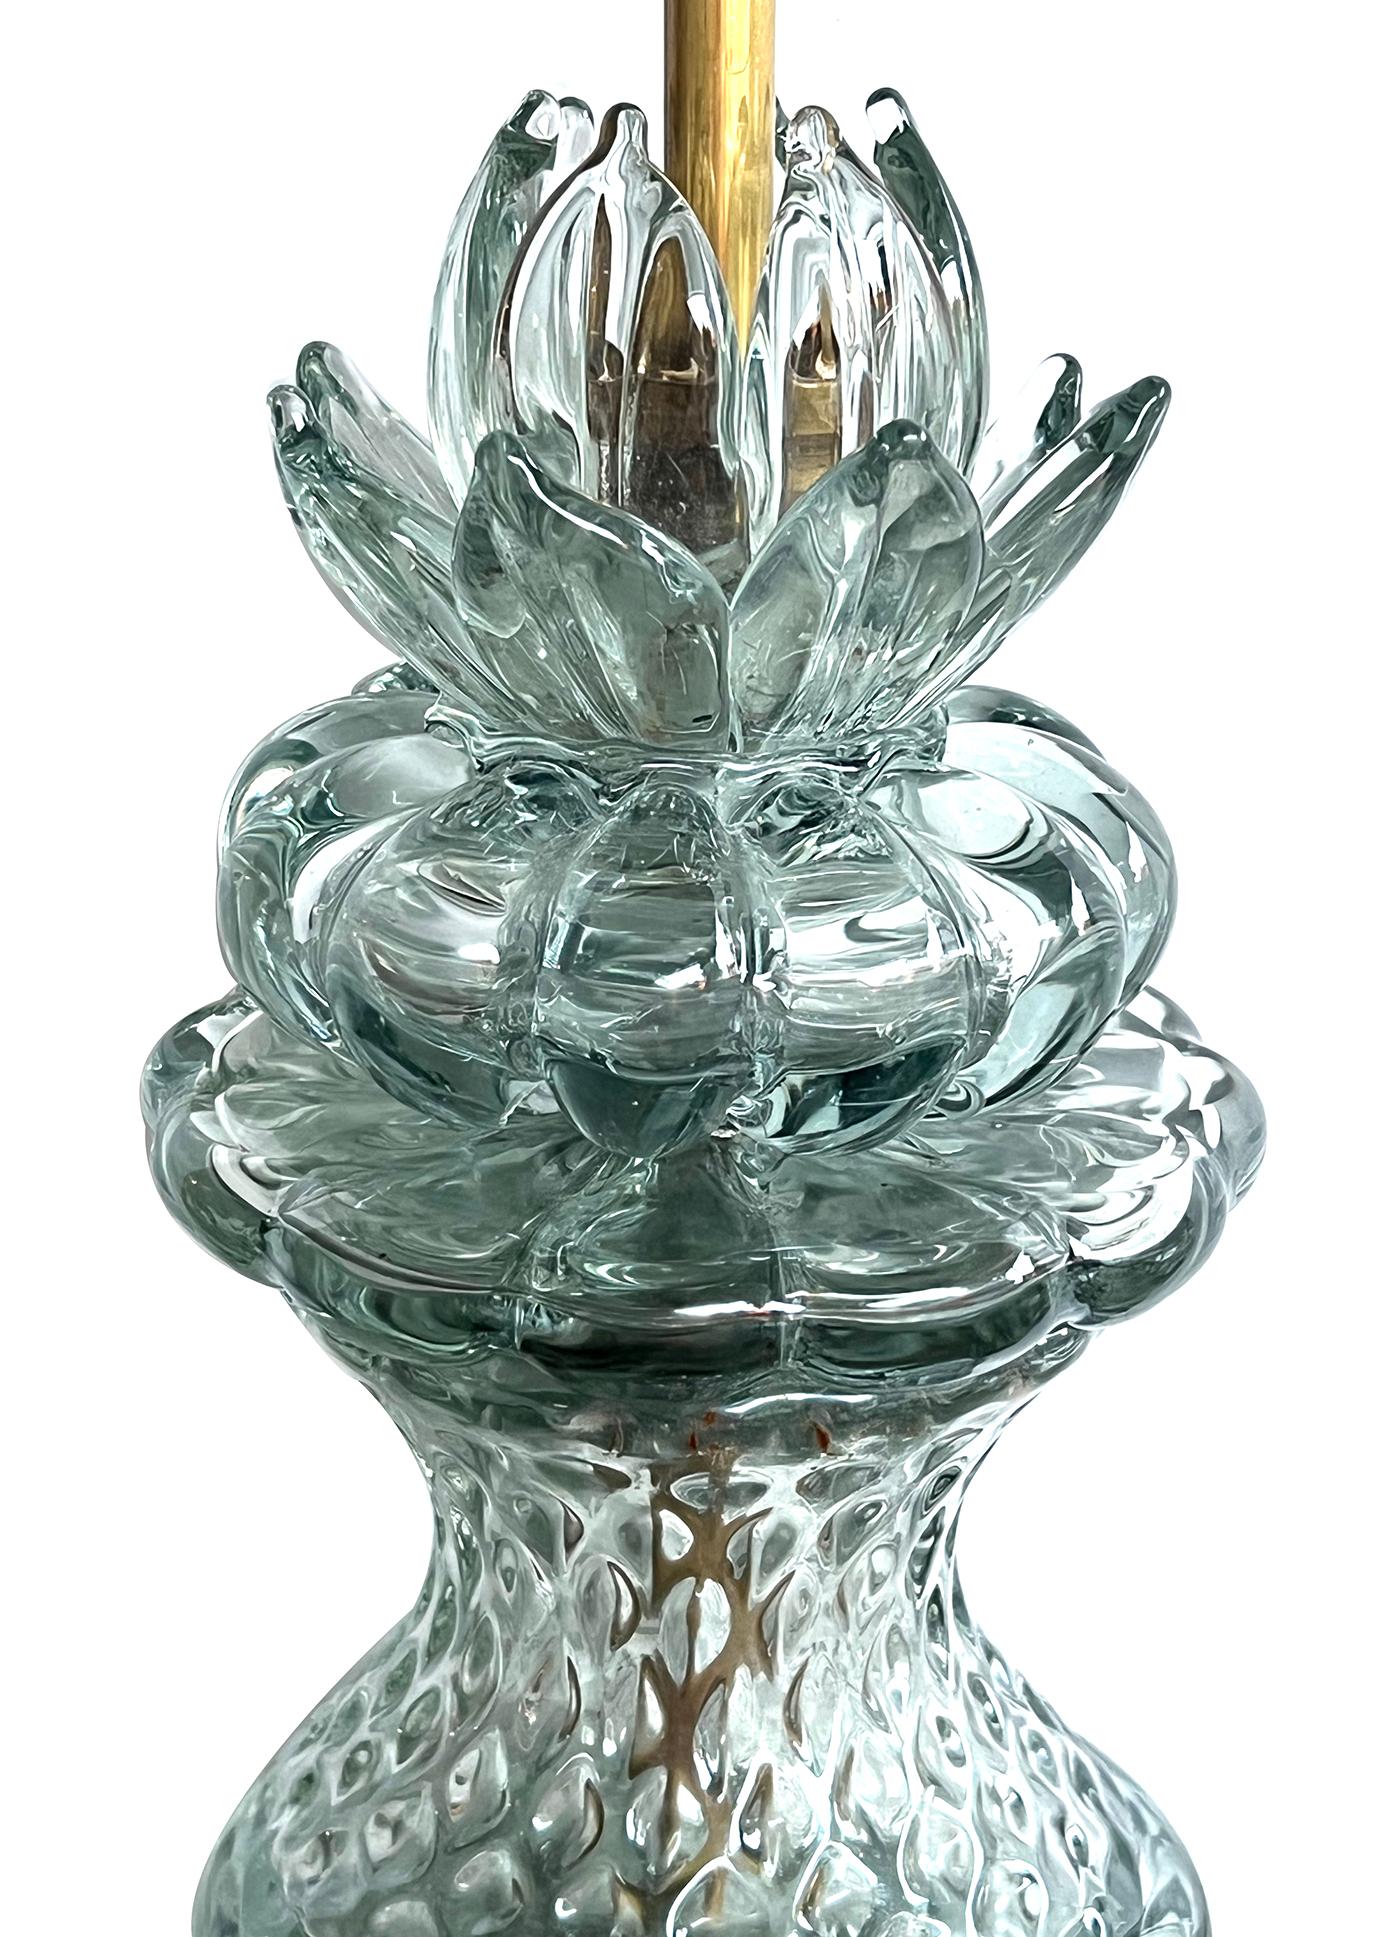 each large and heavy hand-blown lamp with textured surface capped by a splayed crown over a waisted neck and spheroid body; all resting on a custom giltwood base; manufactured in Italy for the Marbro Lighting Company